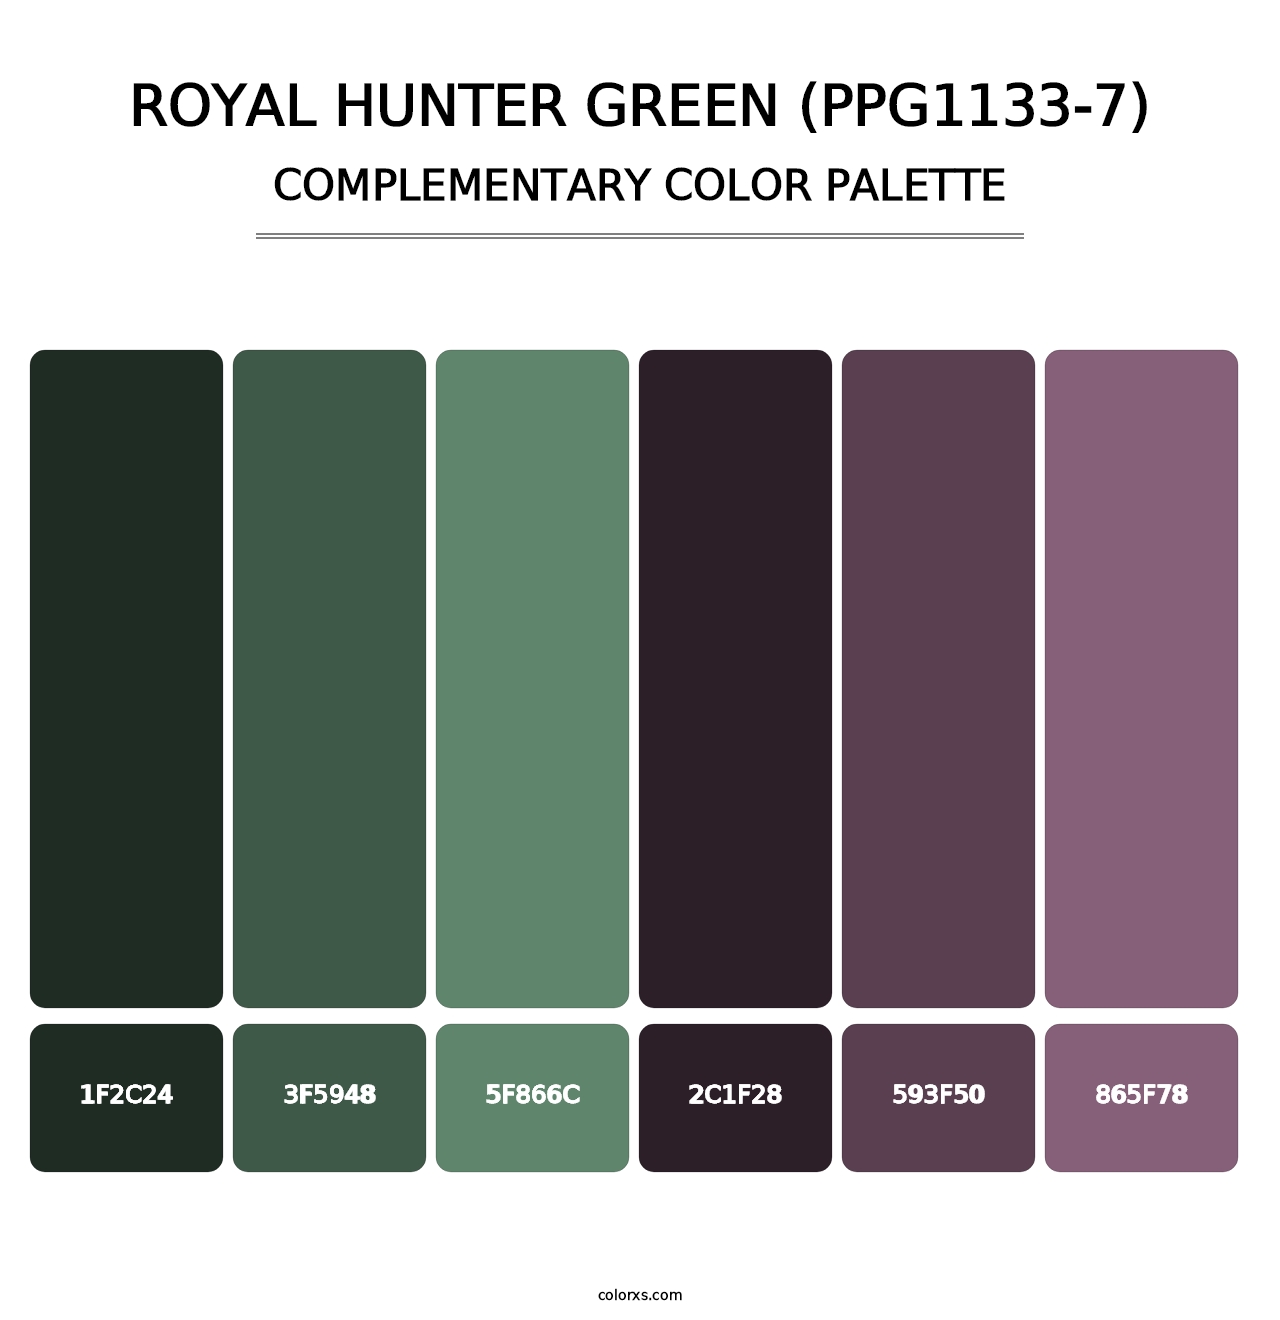 Royal Hunter Green (PPG1133-7) - Complementary Color Palette